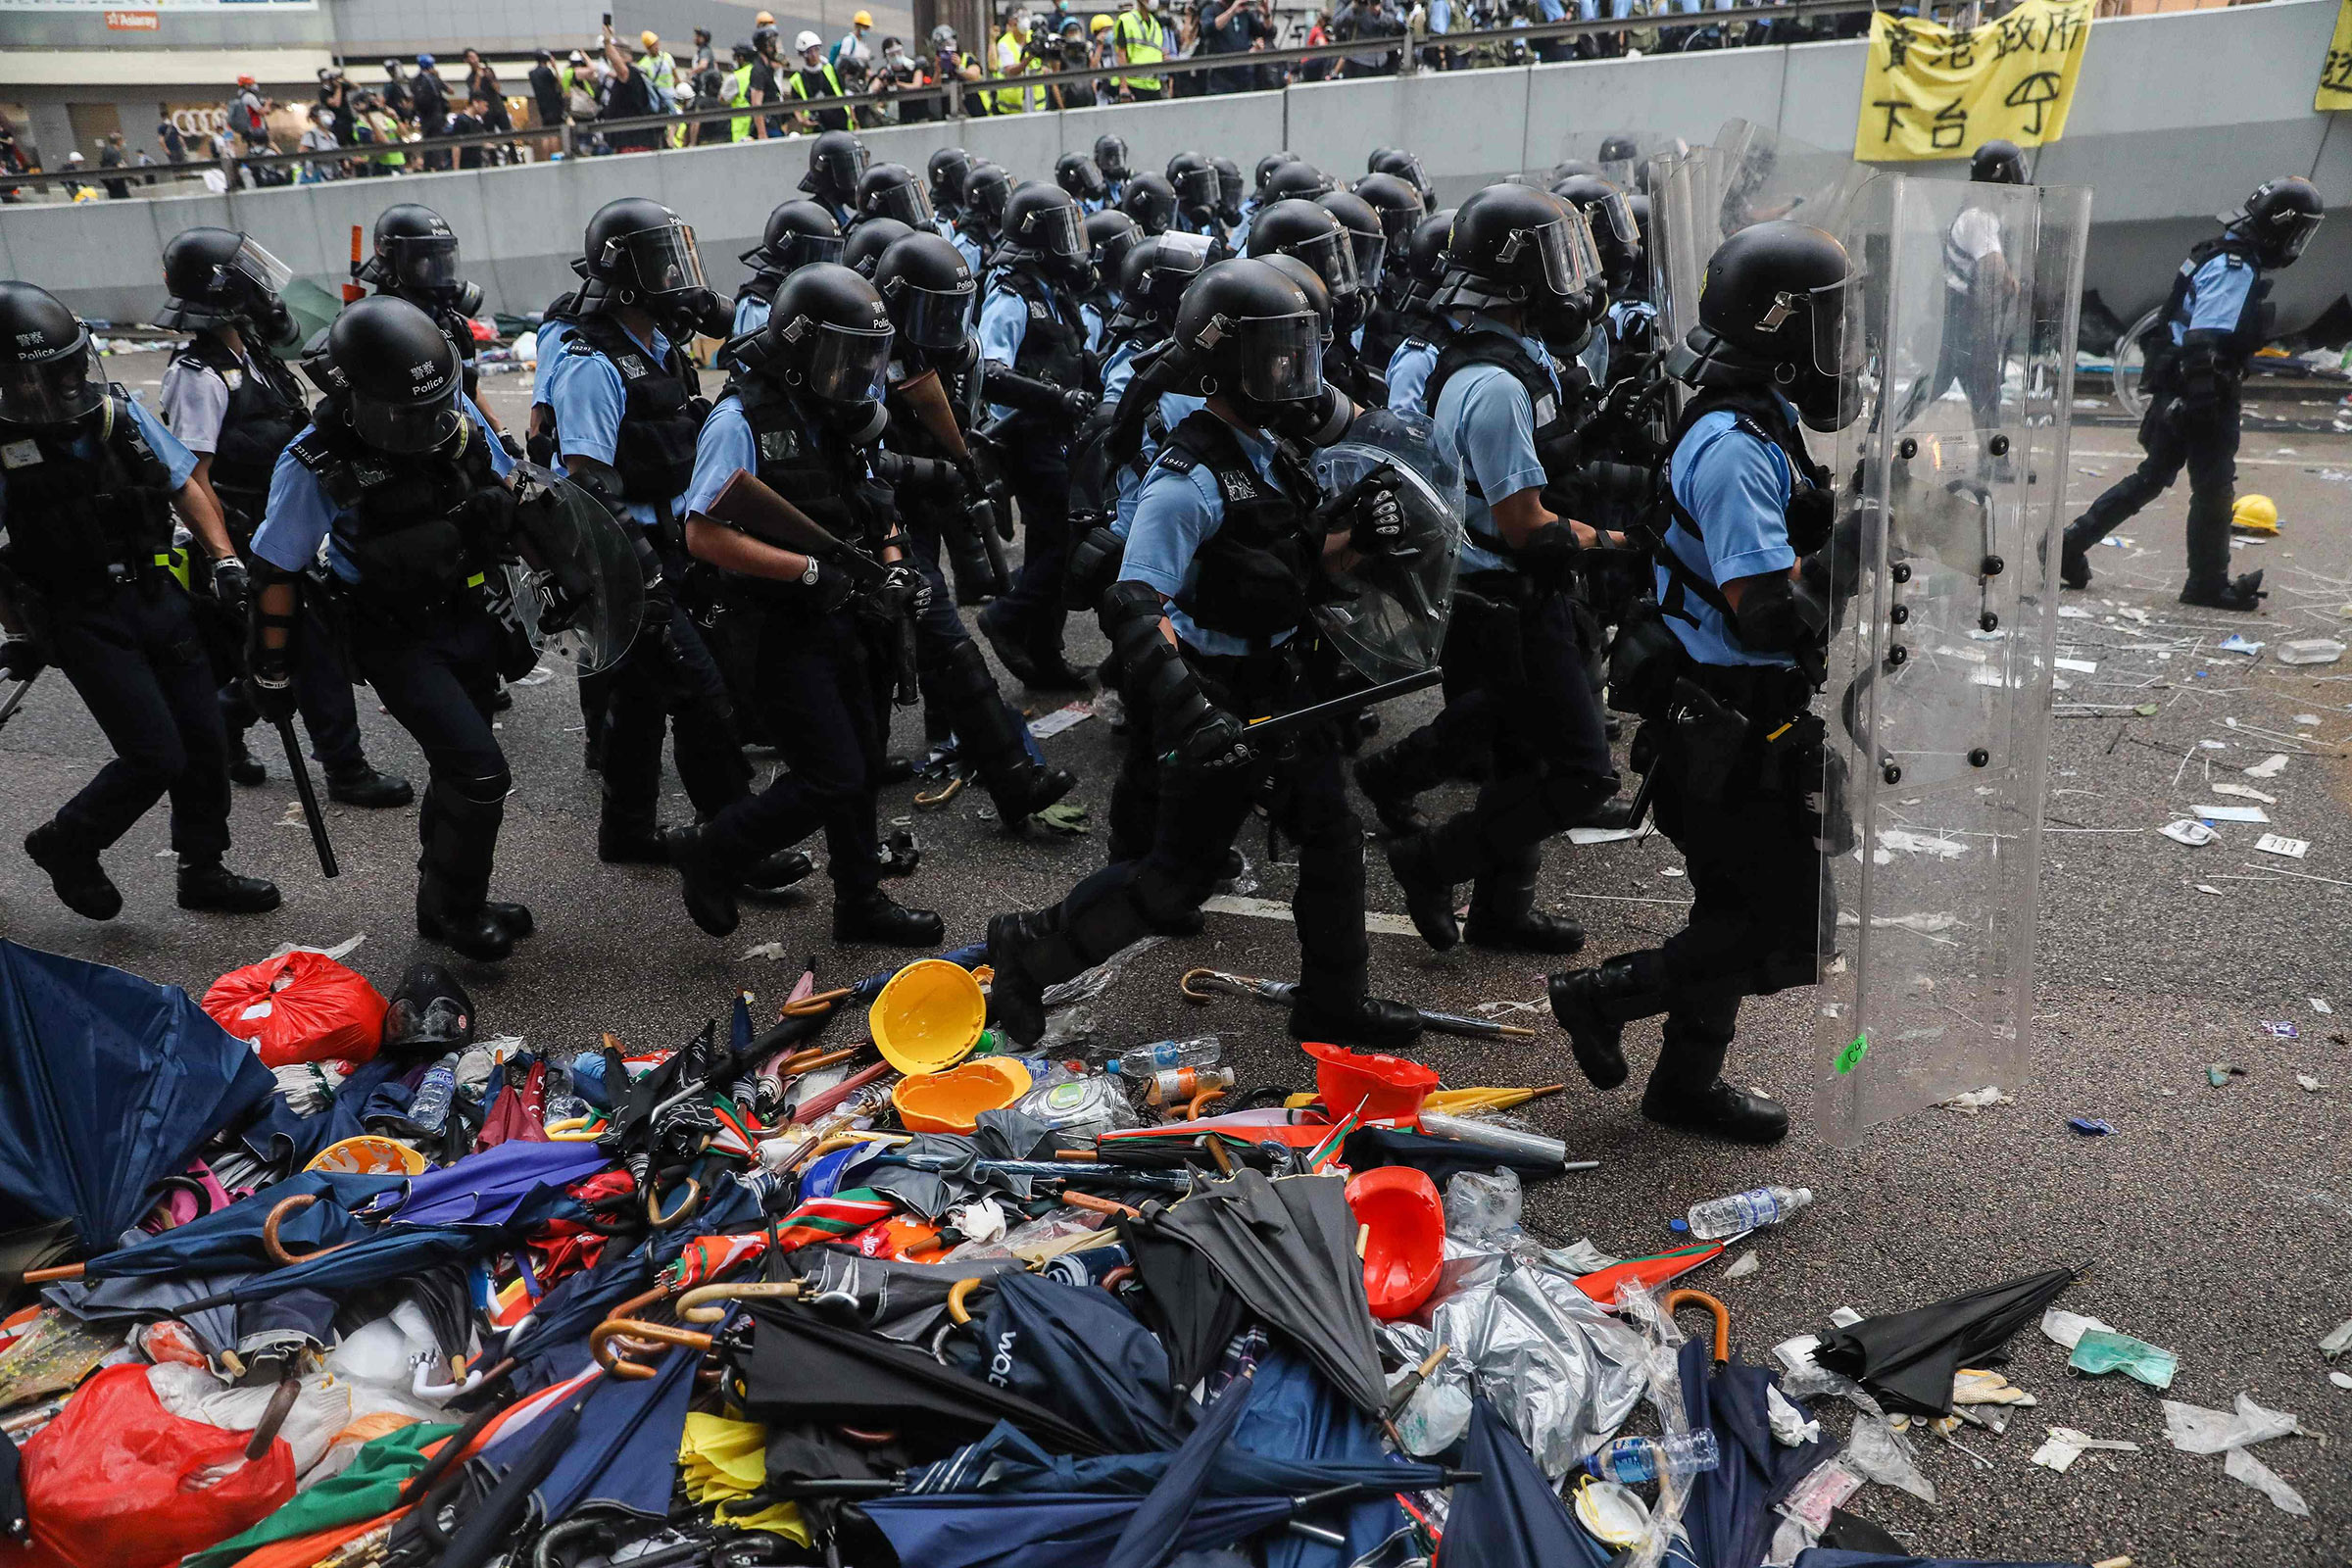 Police advance towards protesters during a rally against a controversial extradition law proposal outside the government headquarters in Hong Kong on June 12. (Dale De La Rey—AFP/Getty Images)